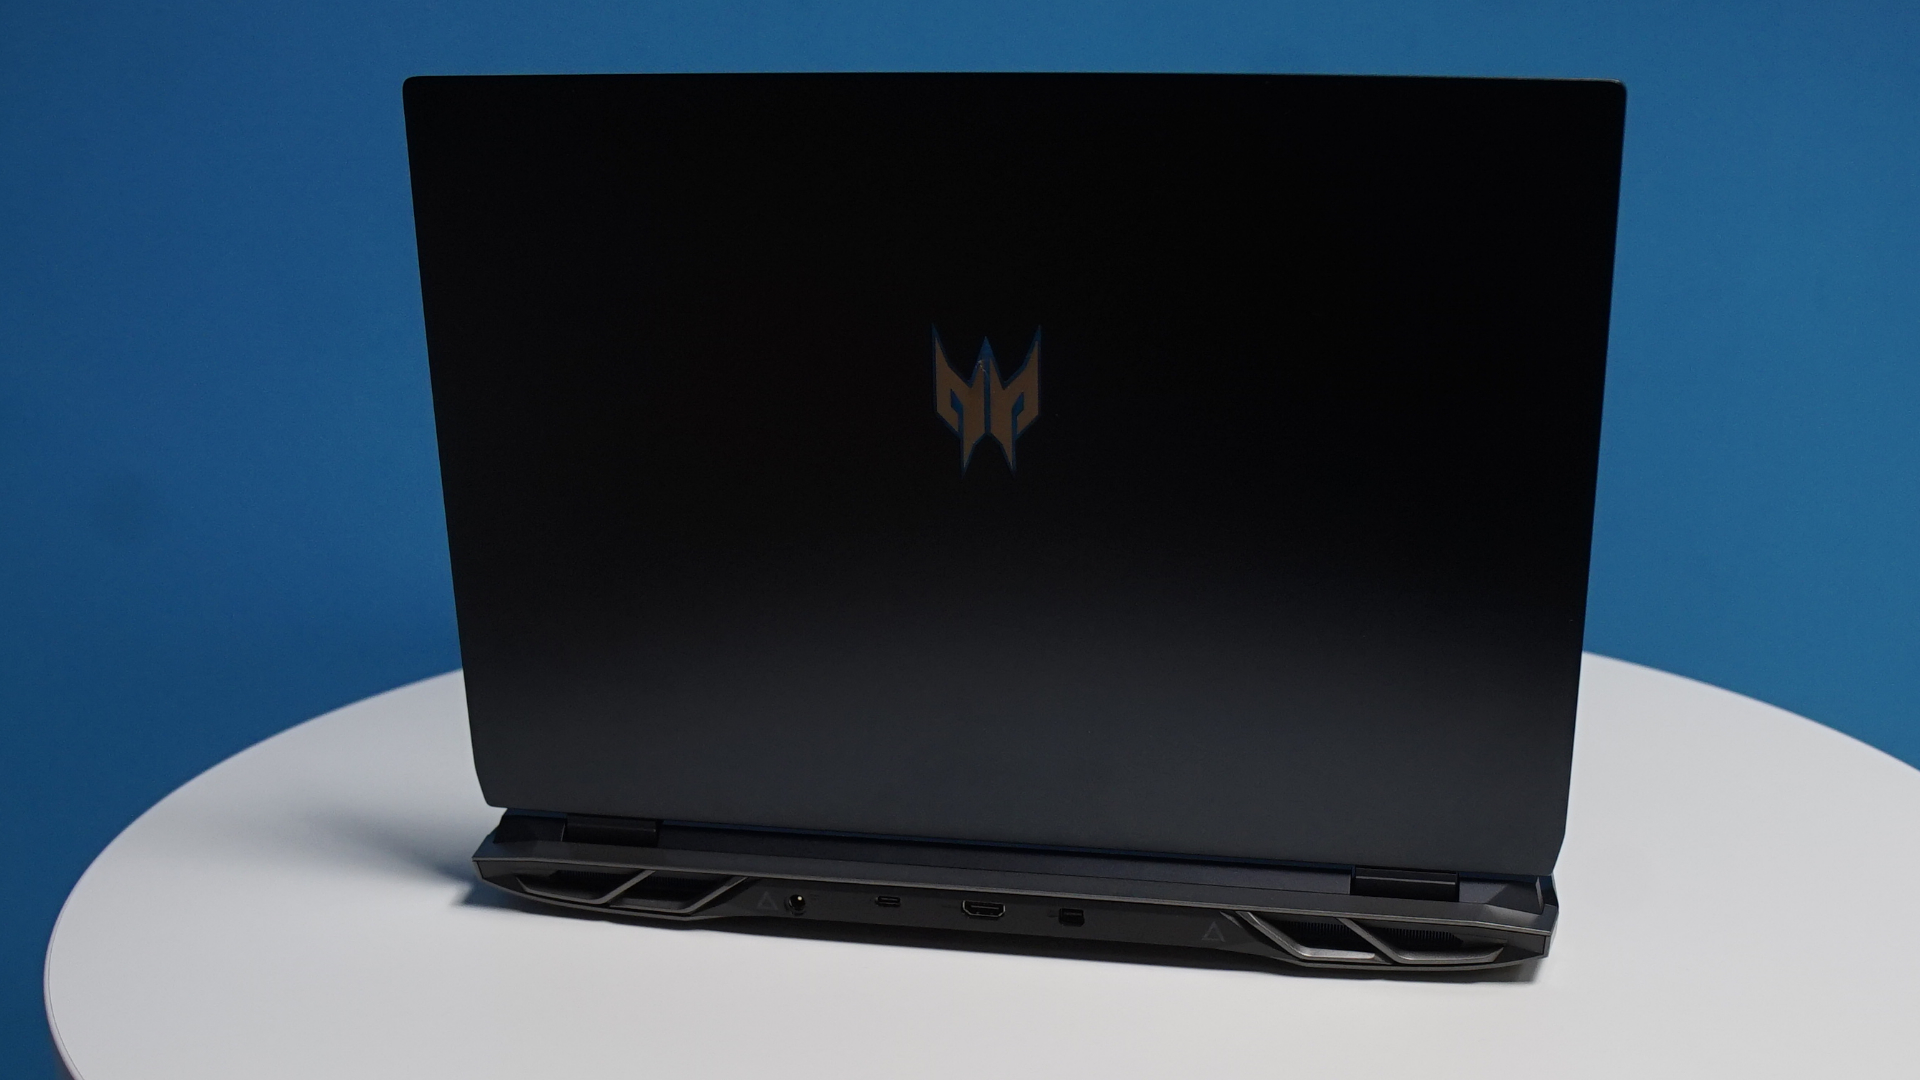 Acer Predator Helios gaming laptop from the back.